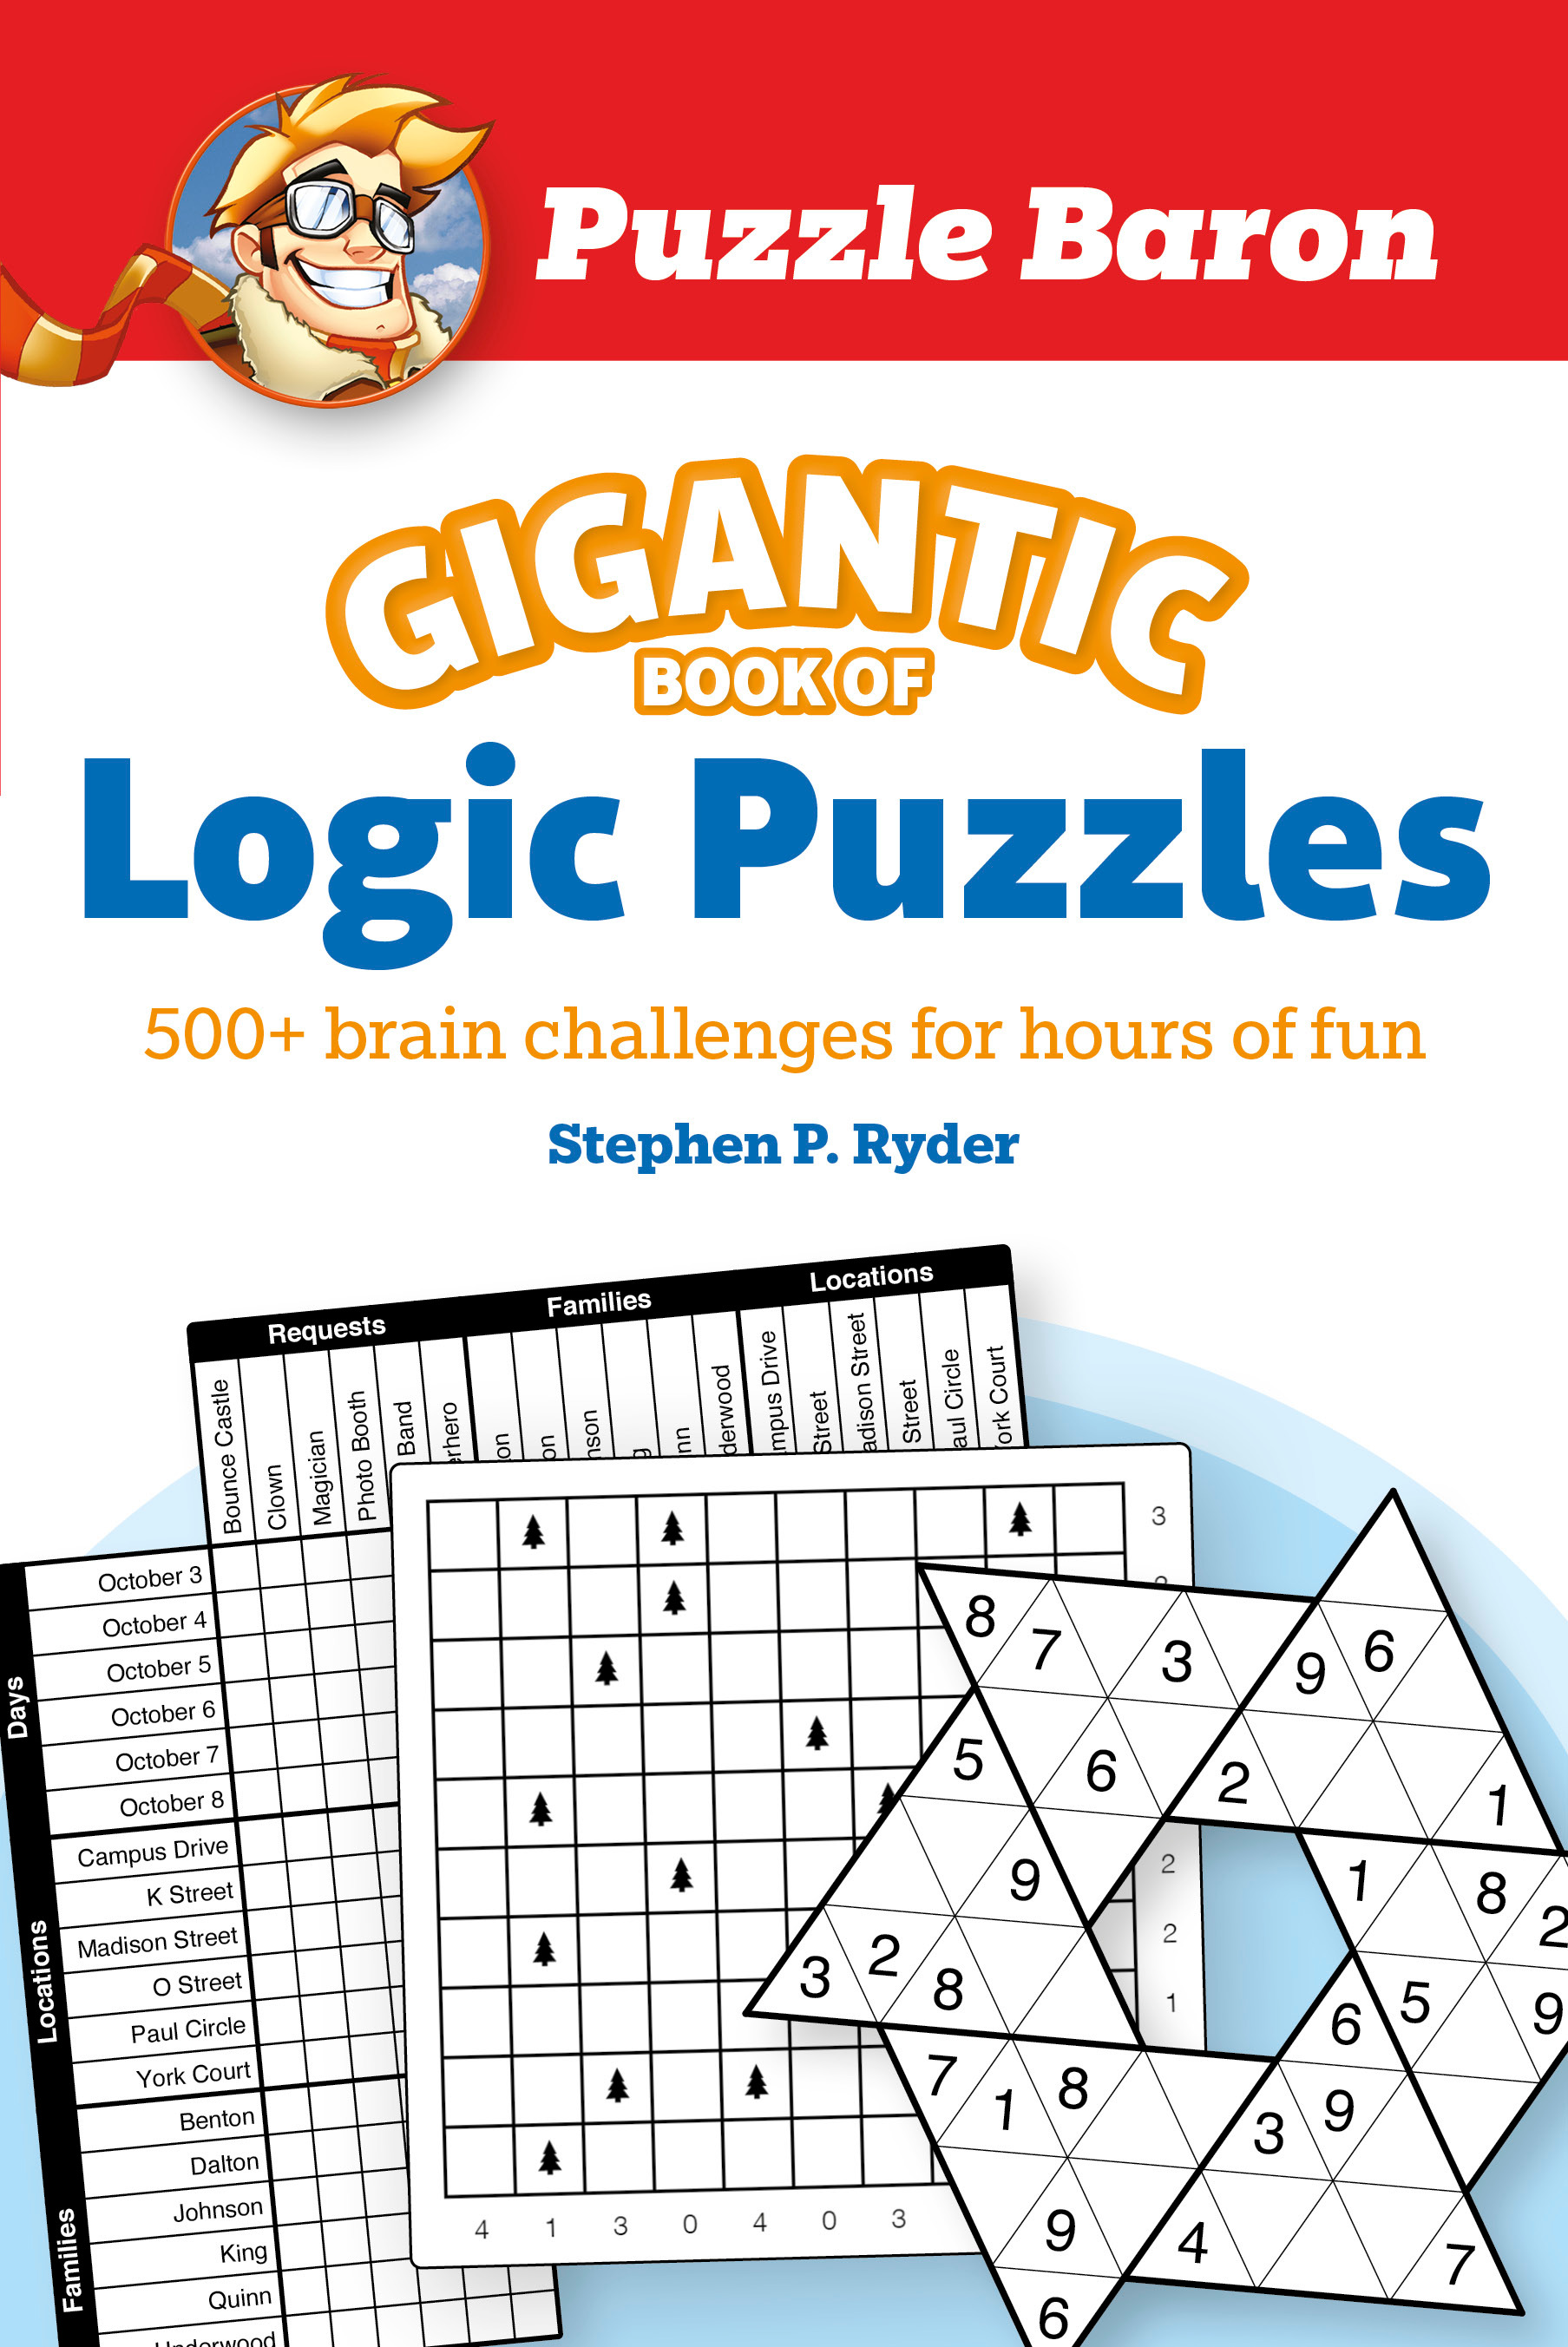 Puzzle Baron's Gigantic Book of Logic Puzzles : 600+ Brain Challenges for Hours of Fun | Baron, Puzzle